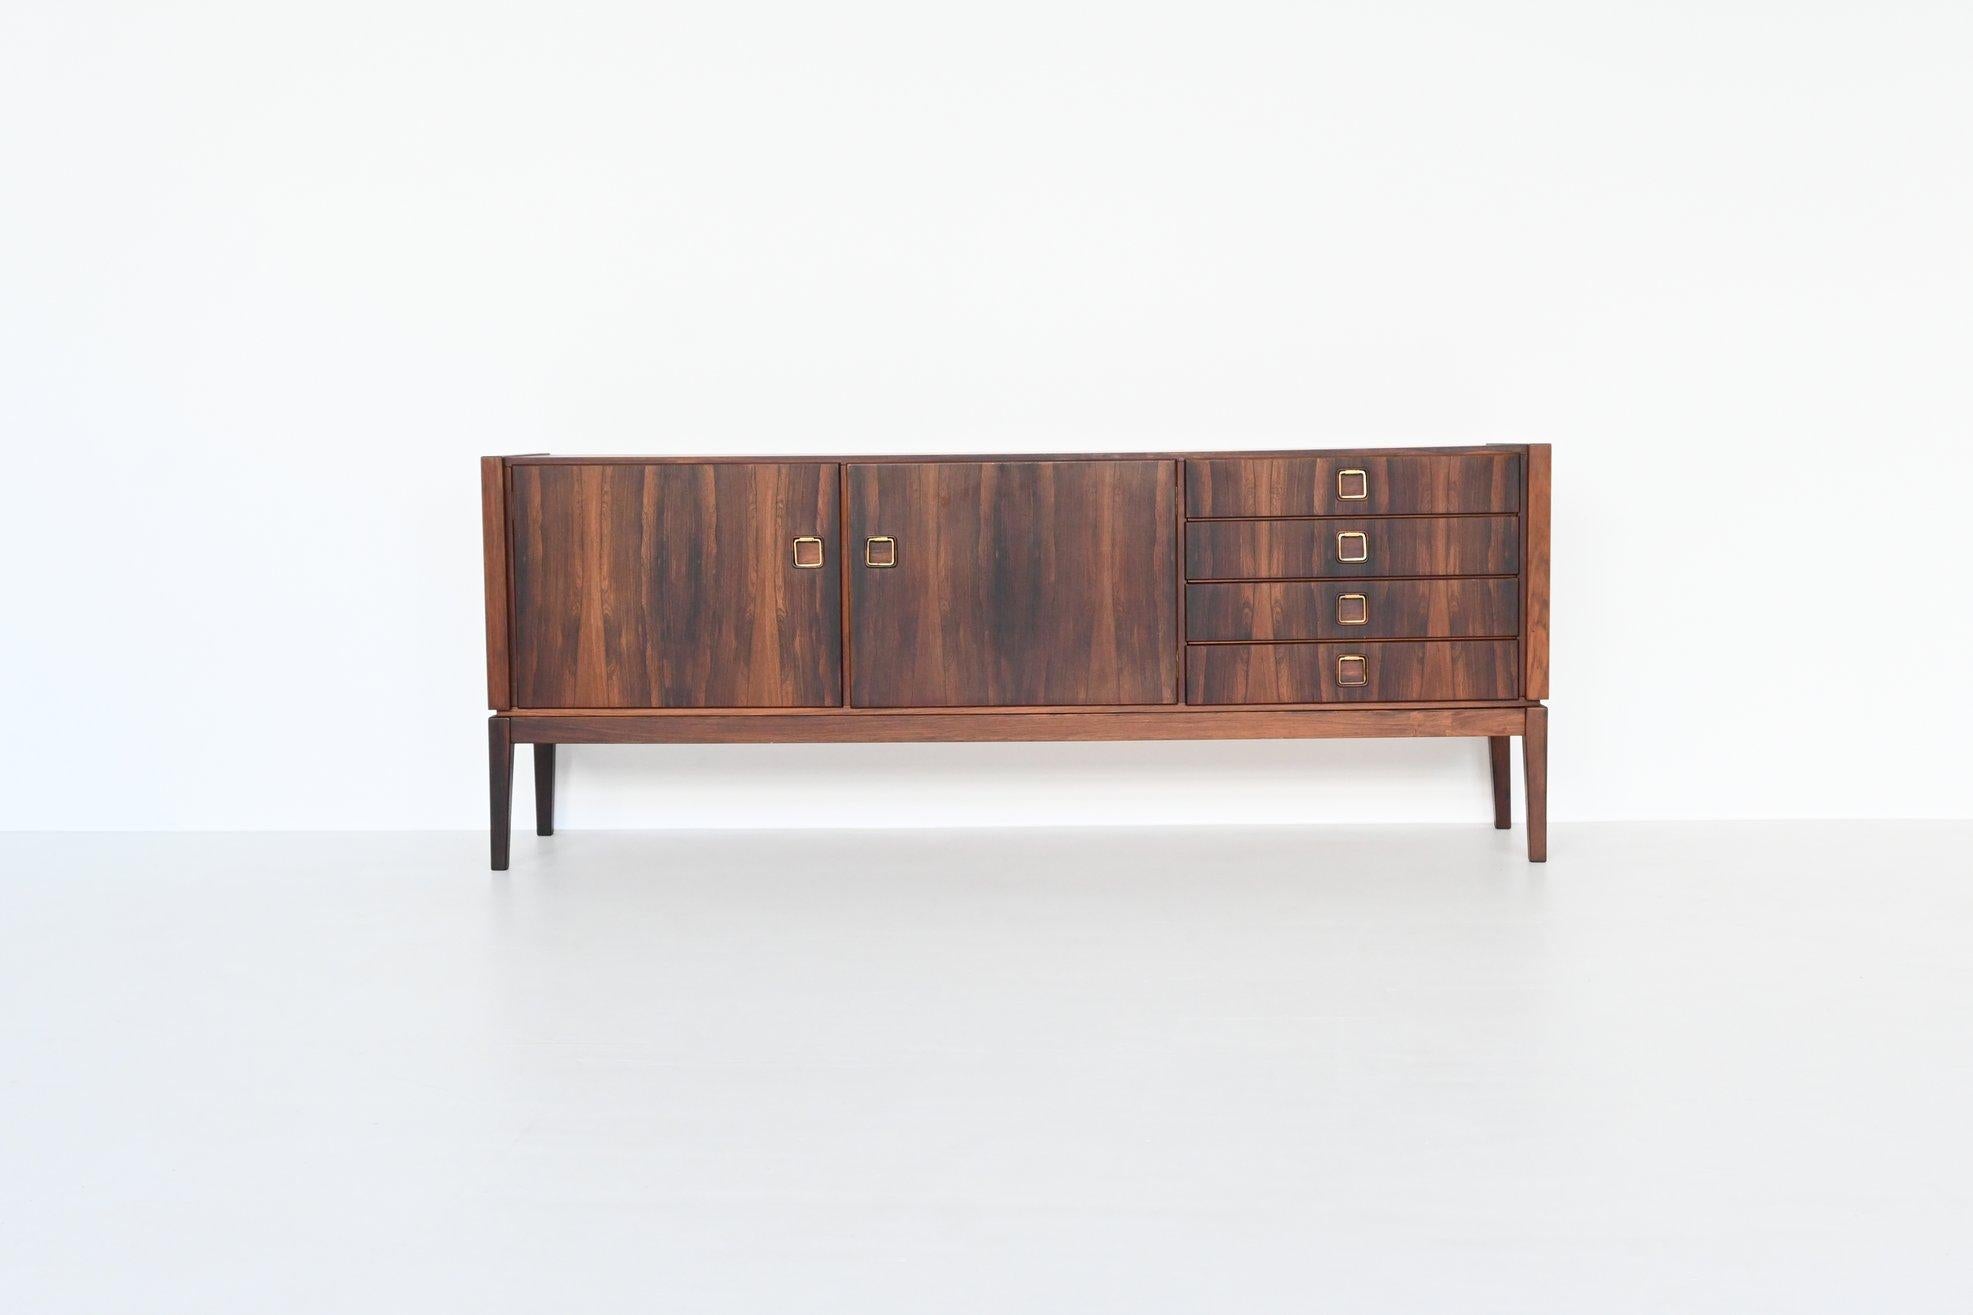 Beautiful sideboard or credenza manufactured by Topform, The Netherlands 1960. This very nice slim shaped sideboard is made of beautifully grained veneered rosewood with solid legs. Even the inside door panels are beautiful flamed. It has two doors